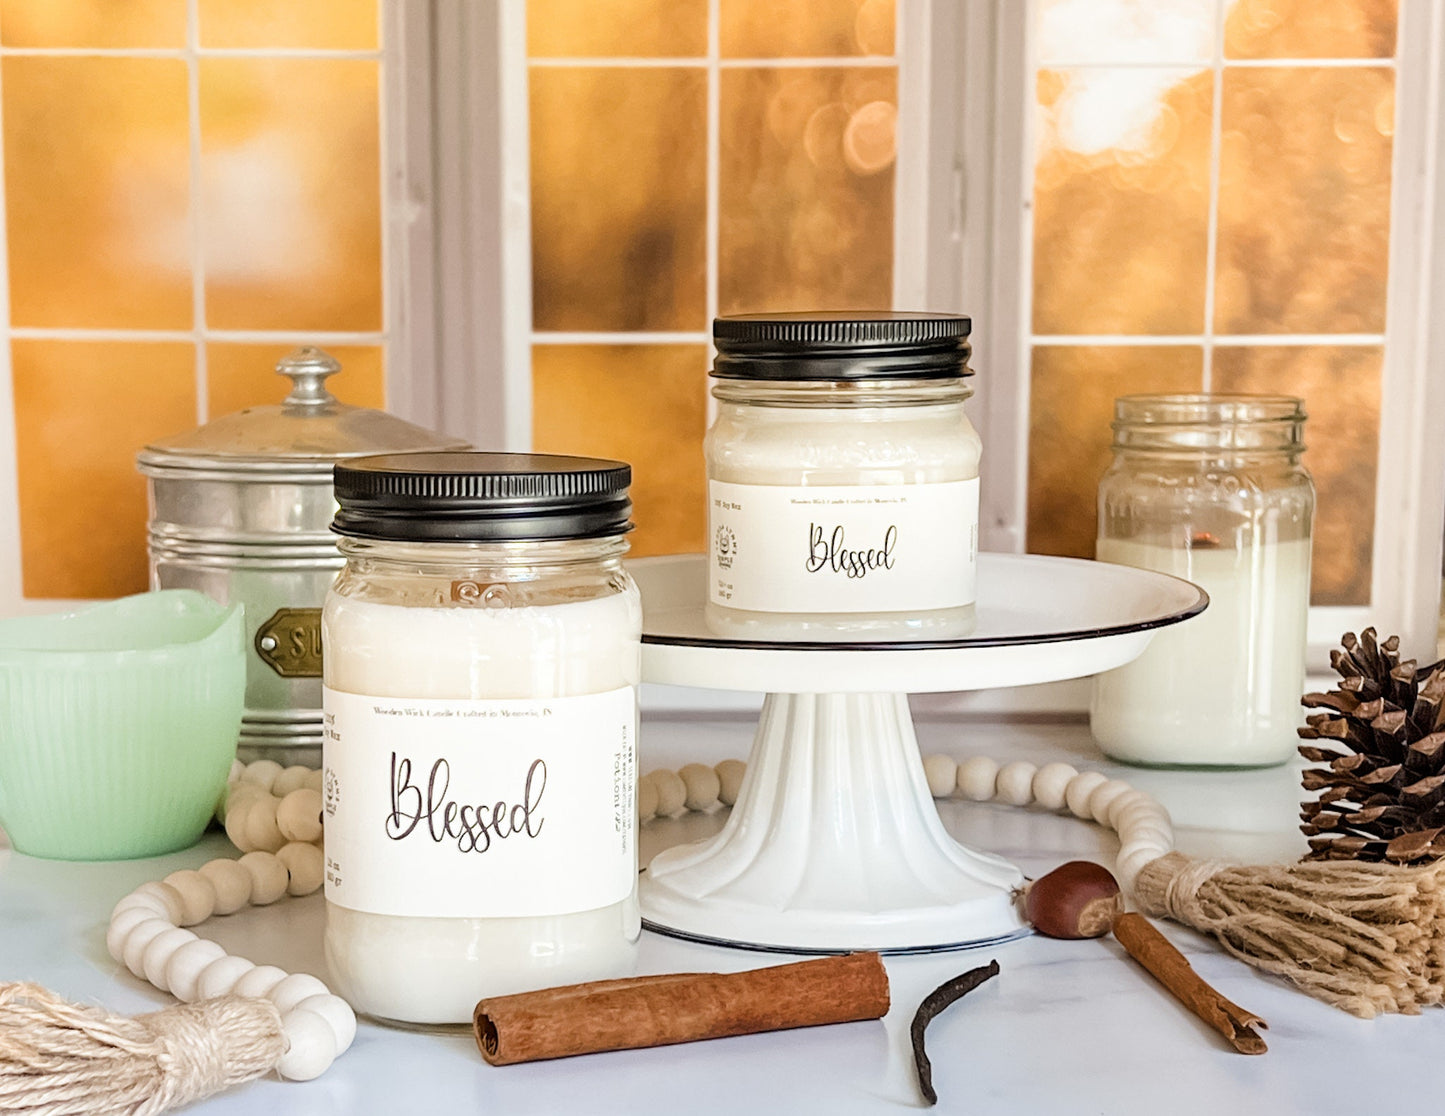 Blessed - Wooden wick soy wax mason jar candle